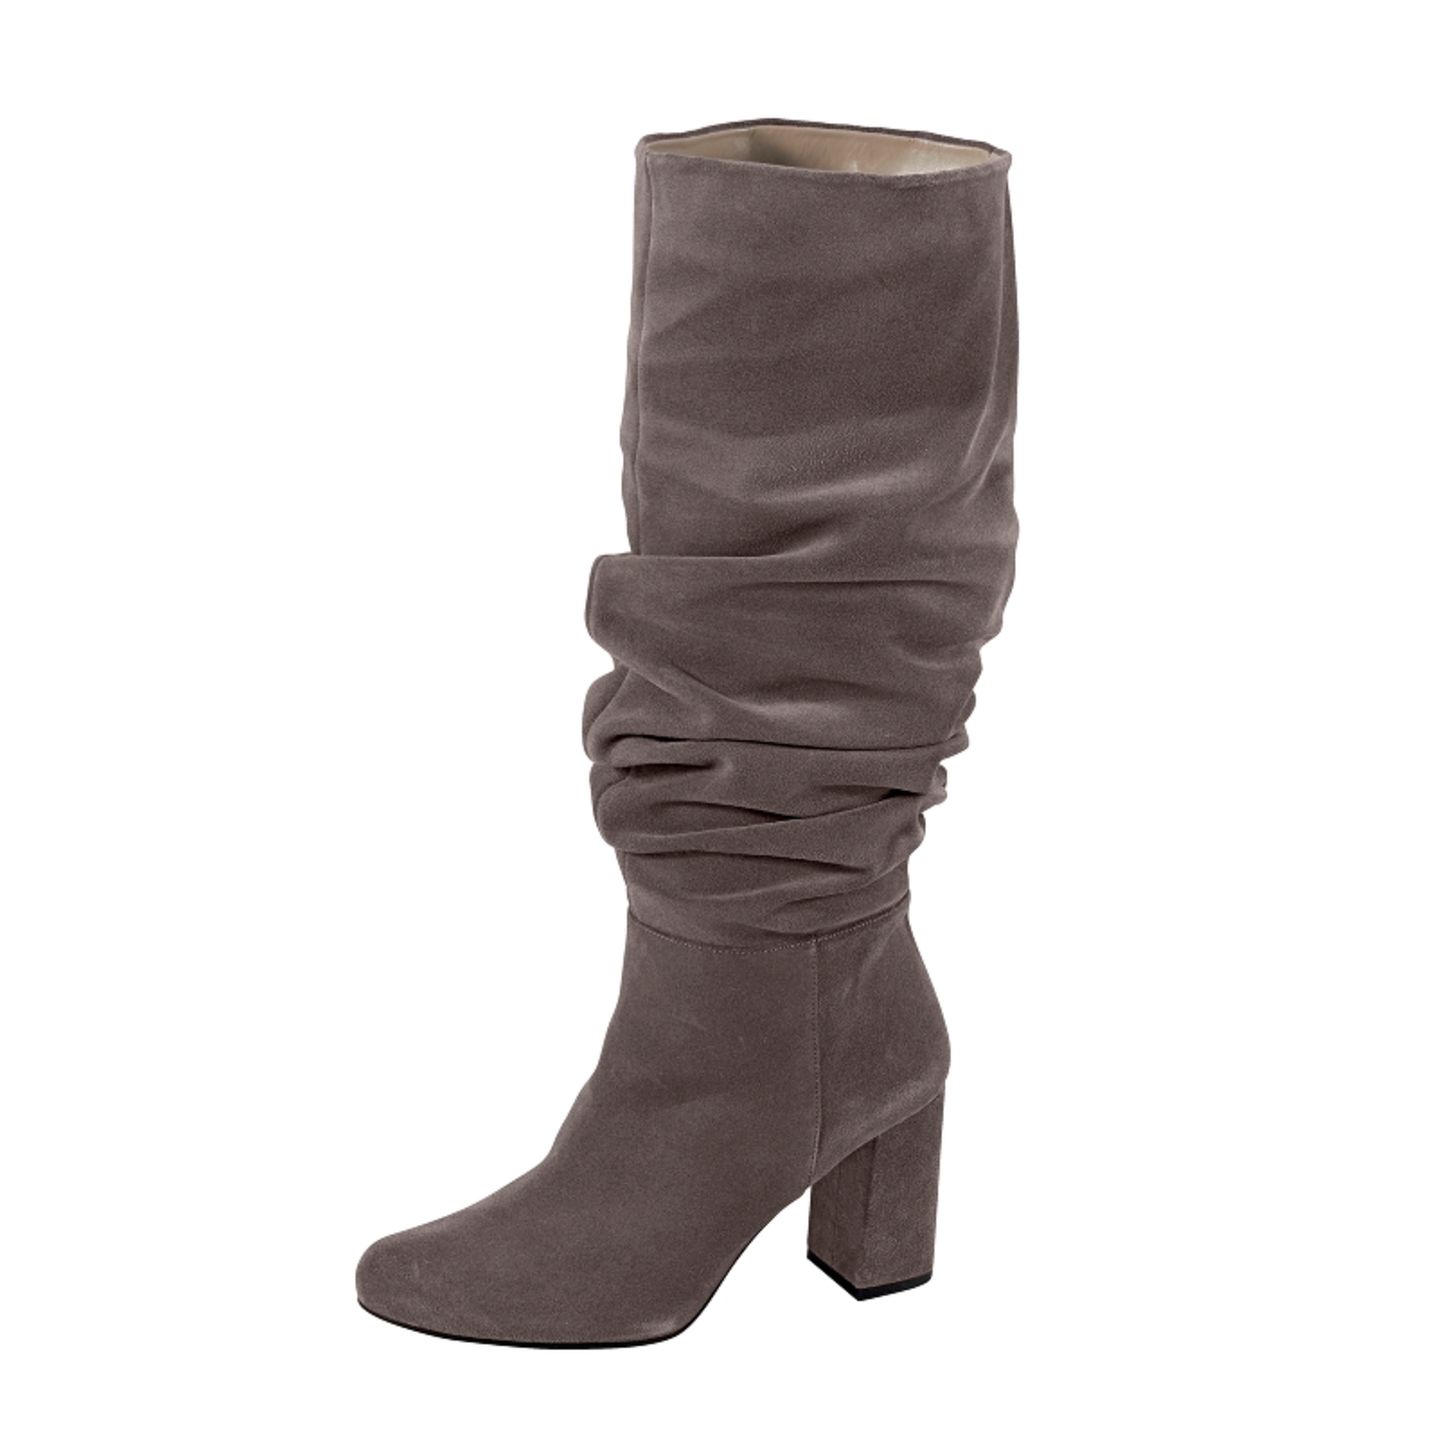 Schuhtrends: Slouchy Stiefel